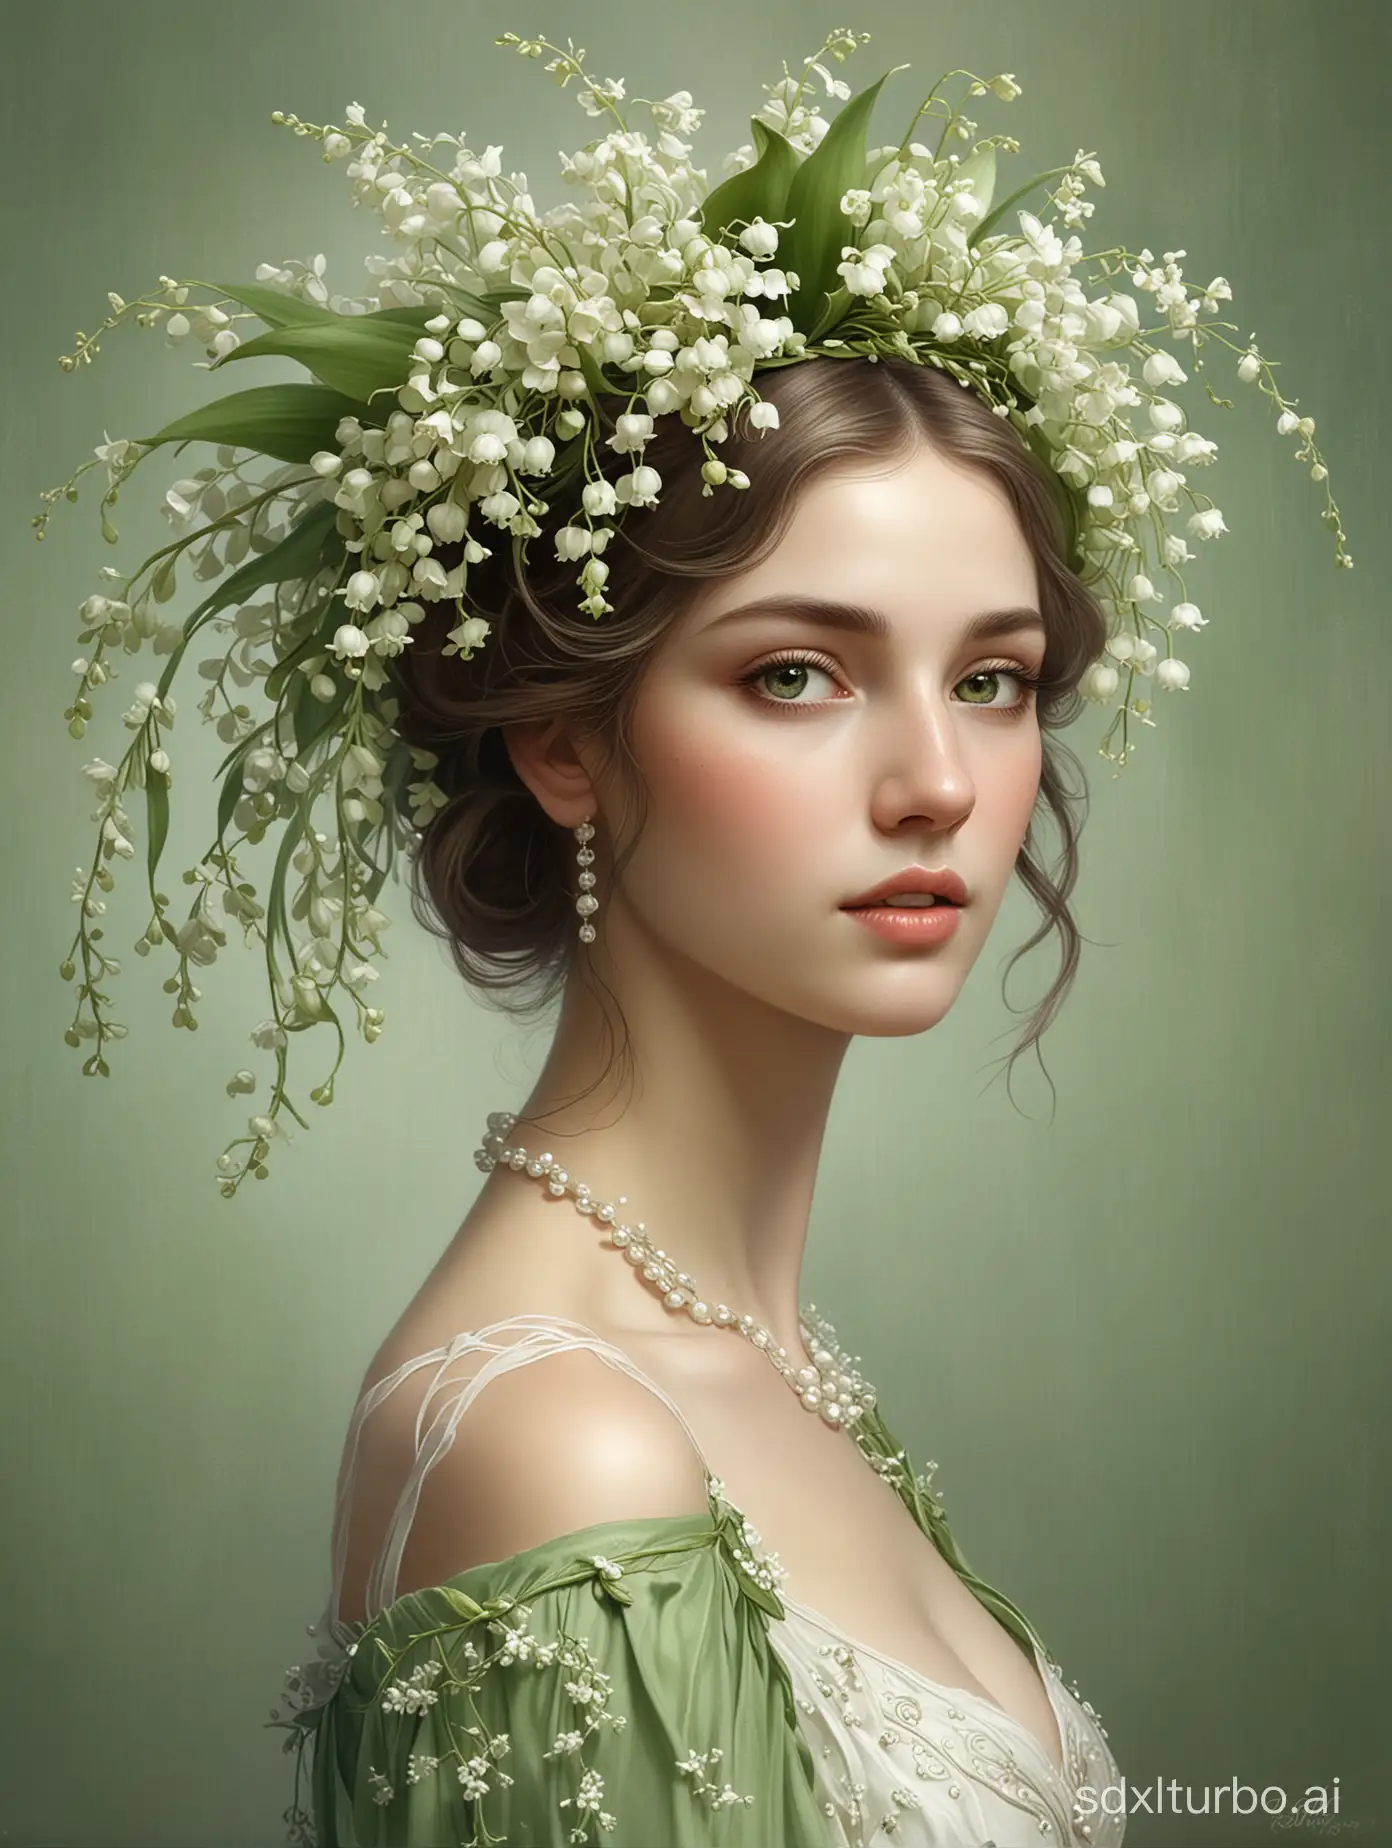 Ethereal-Woman-Adorned-with-Lily-of-the-Valley-Exquisite-Art-Nouveau-Digital-Painting